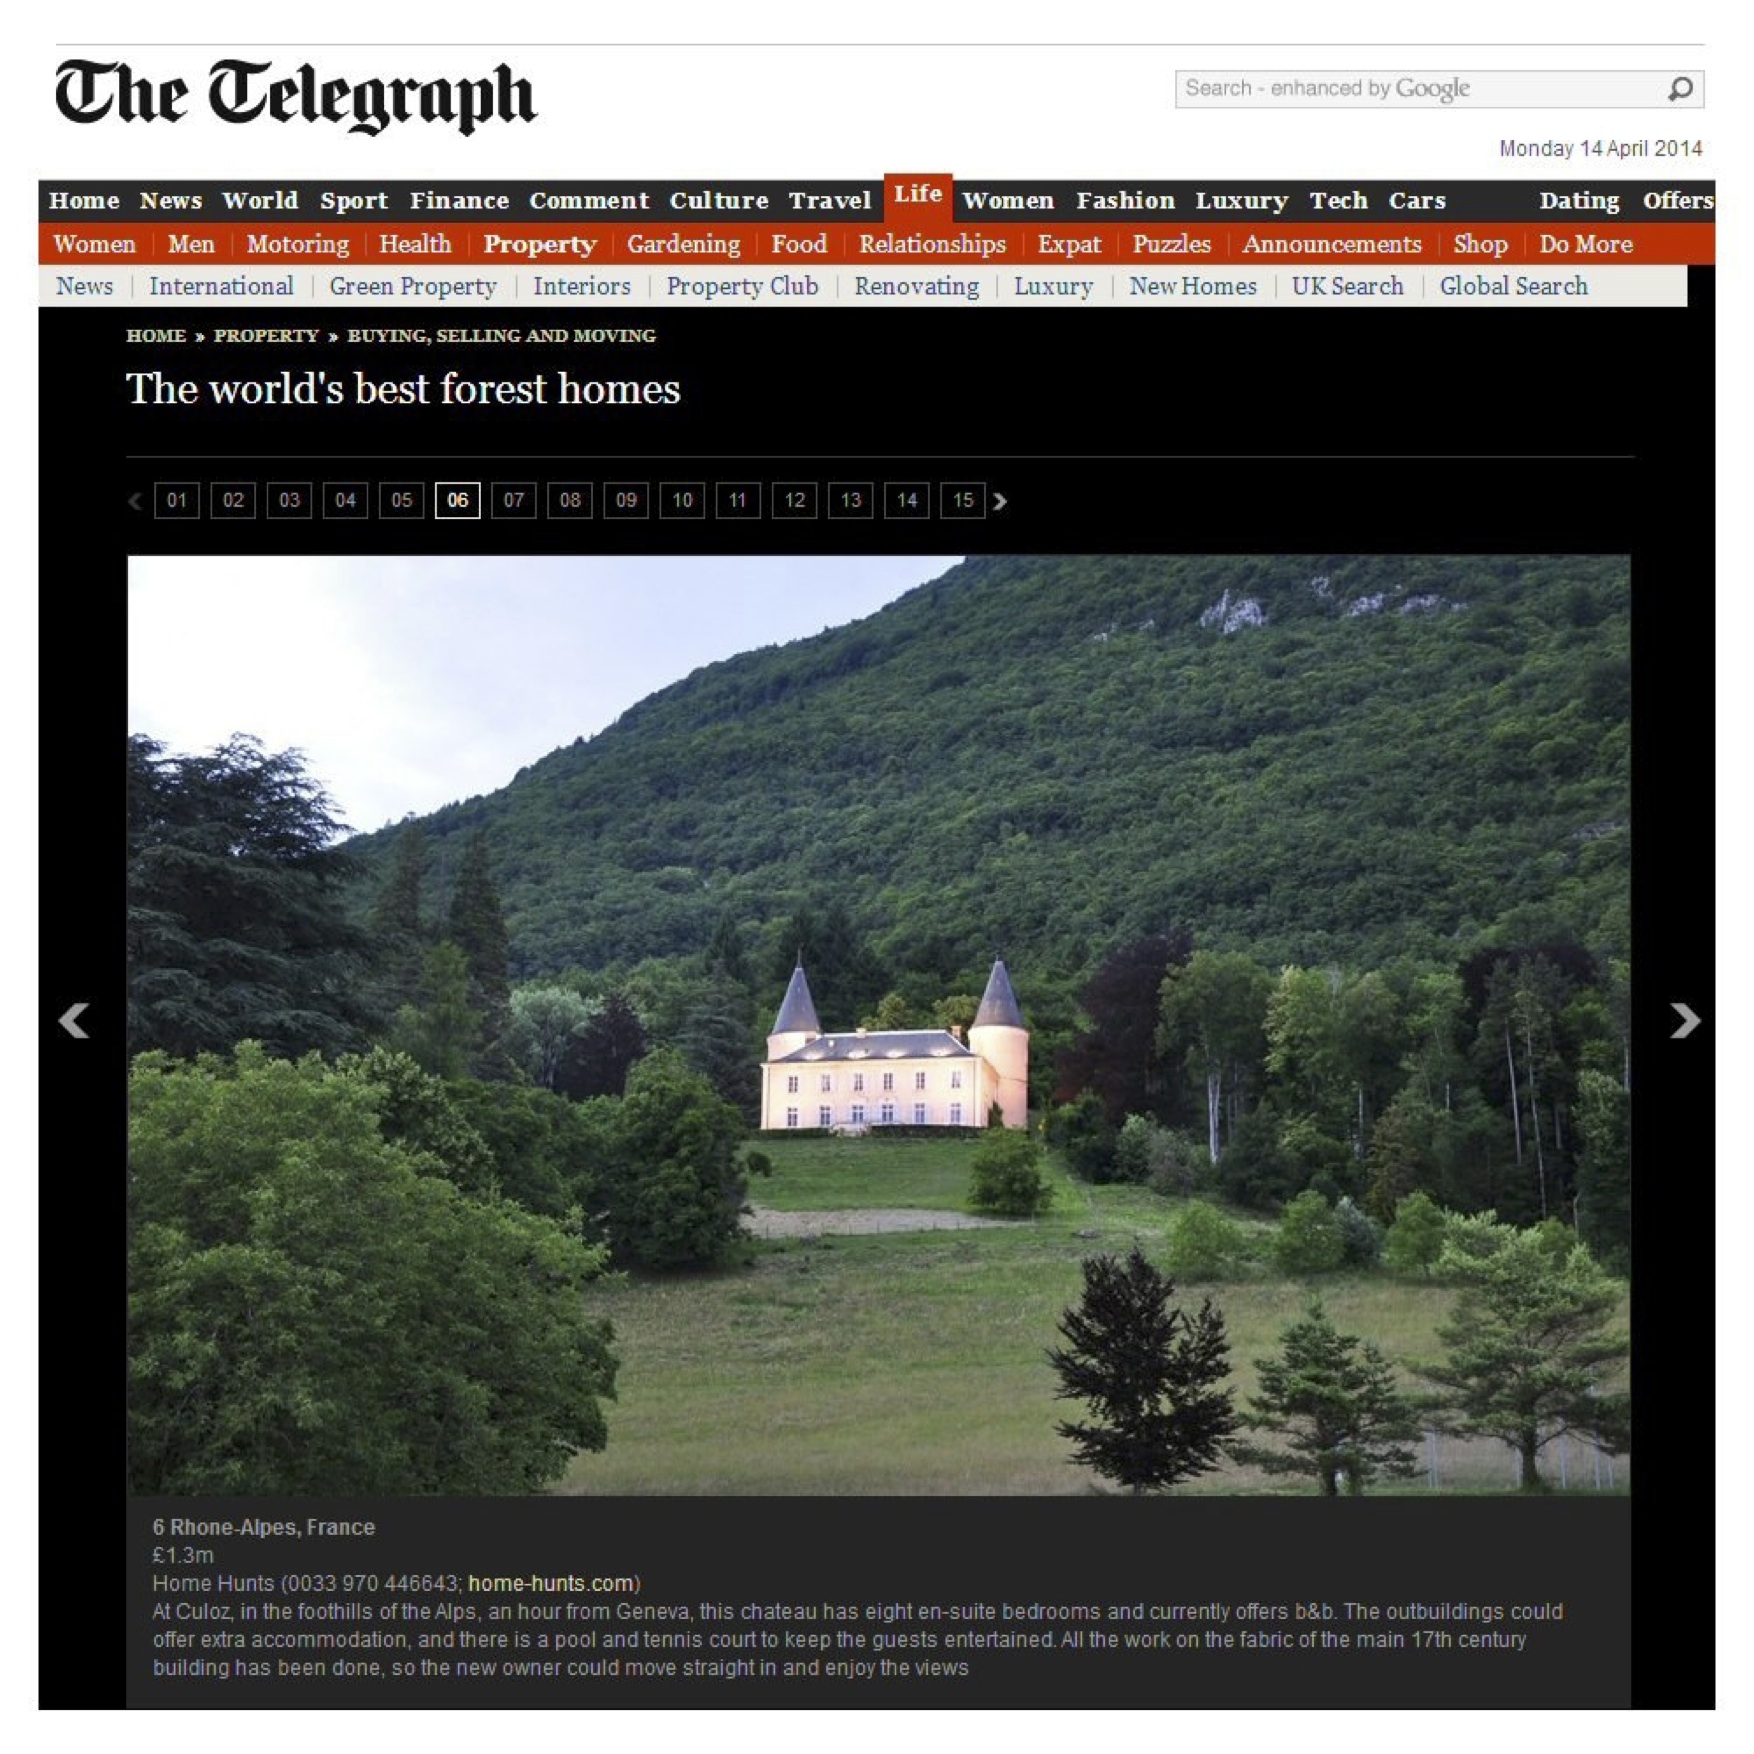 The Daily Telegraph – The World’s best forest homes